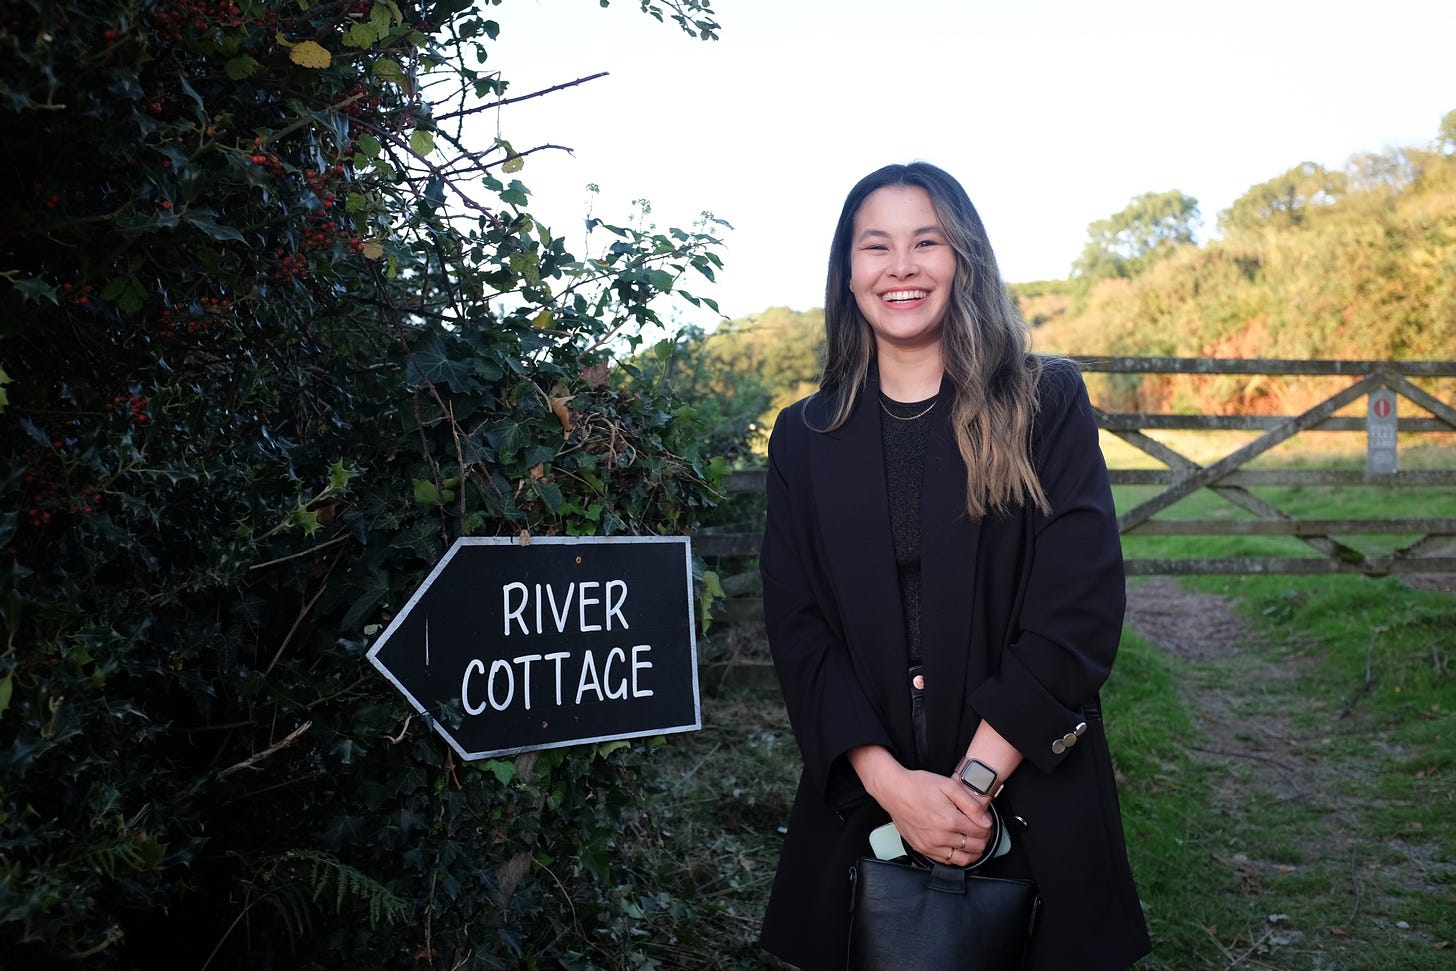 Me, standing with the River Cottage sign